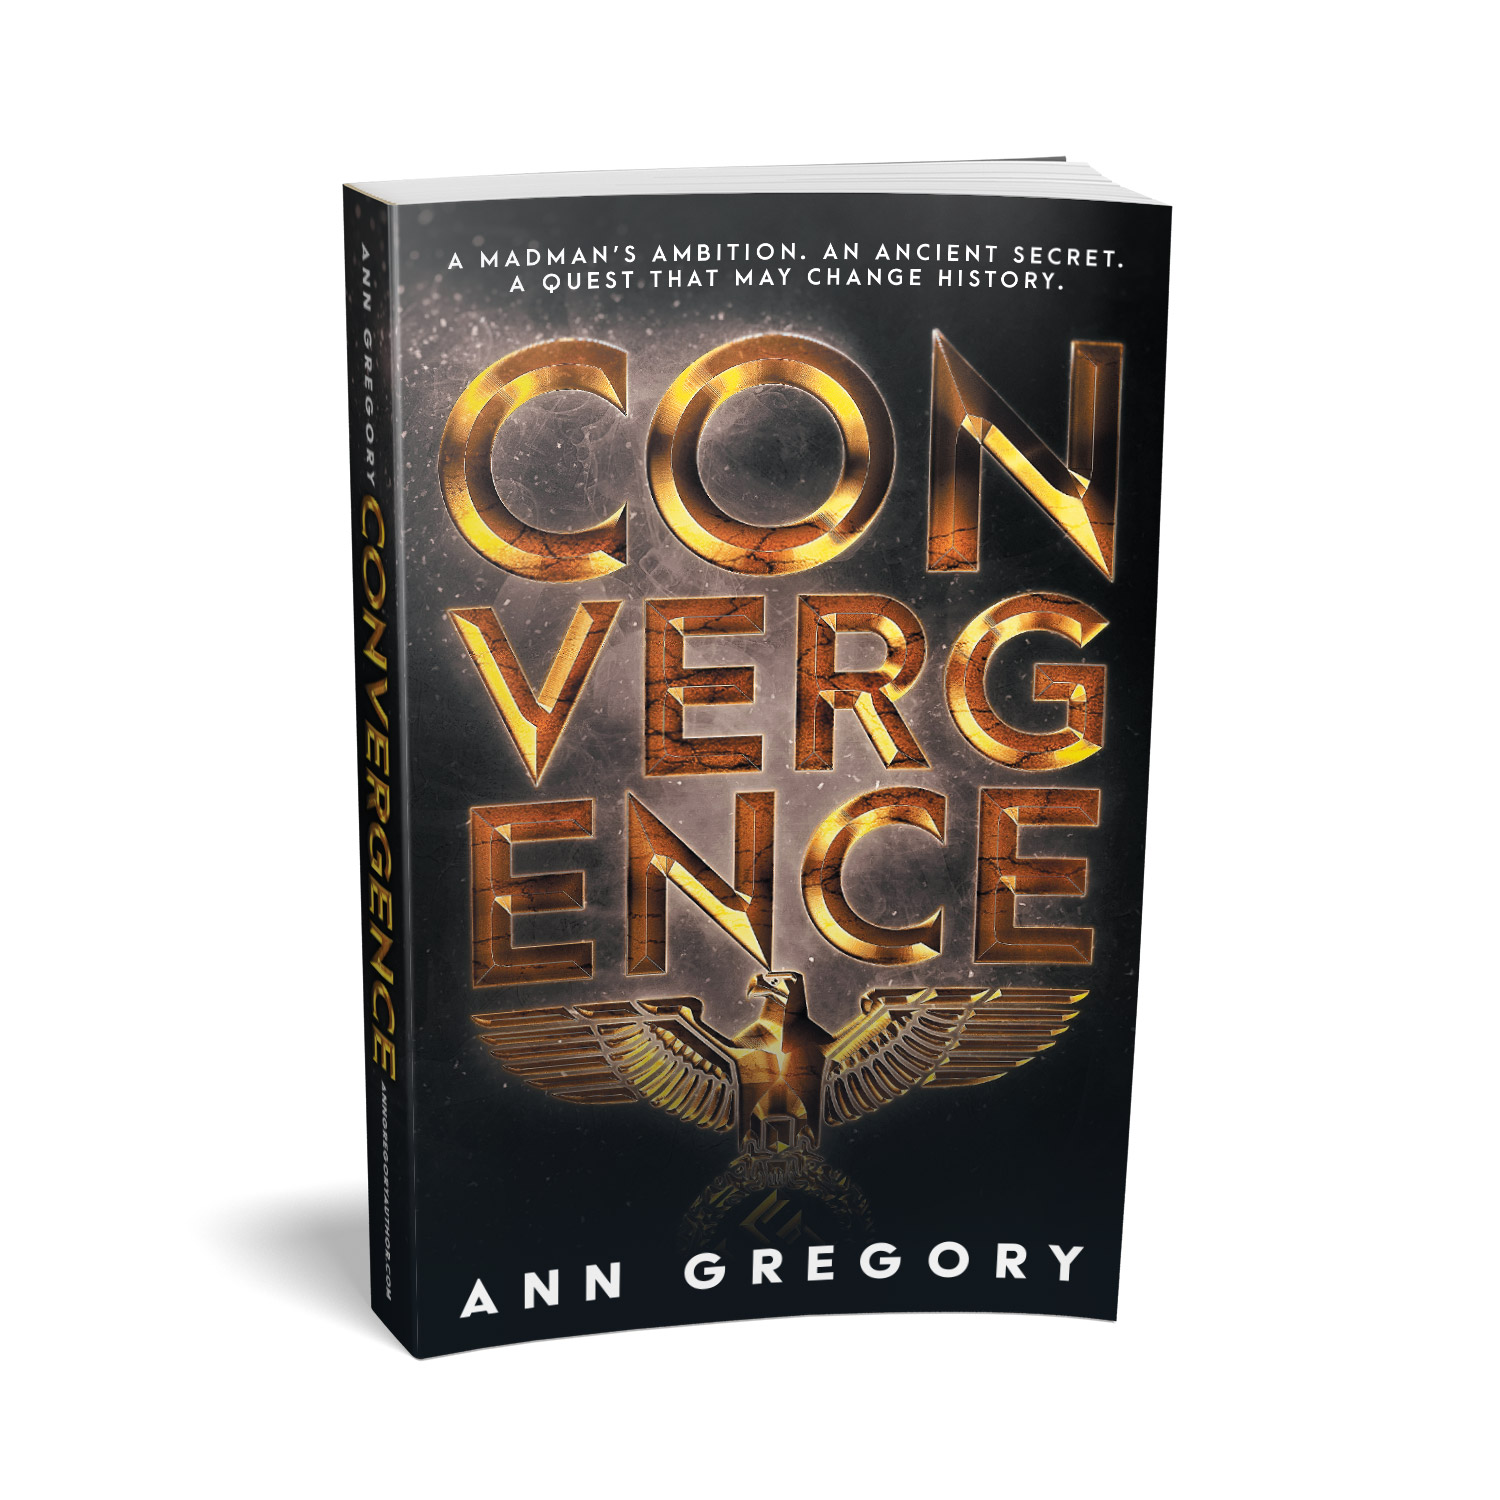 'Convergence' is a globe-trotting, pre-WWII conspiracy thriller. The author is Ann Gregory. The book cover design is by Mark Thomas. To learn more about what Mark could do for your book, please visit coverness.com.